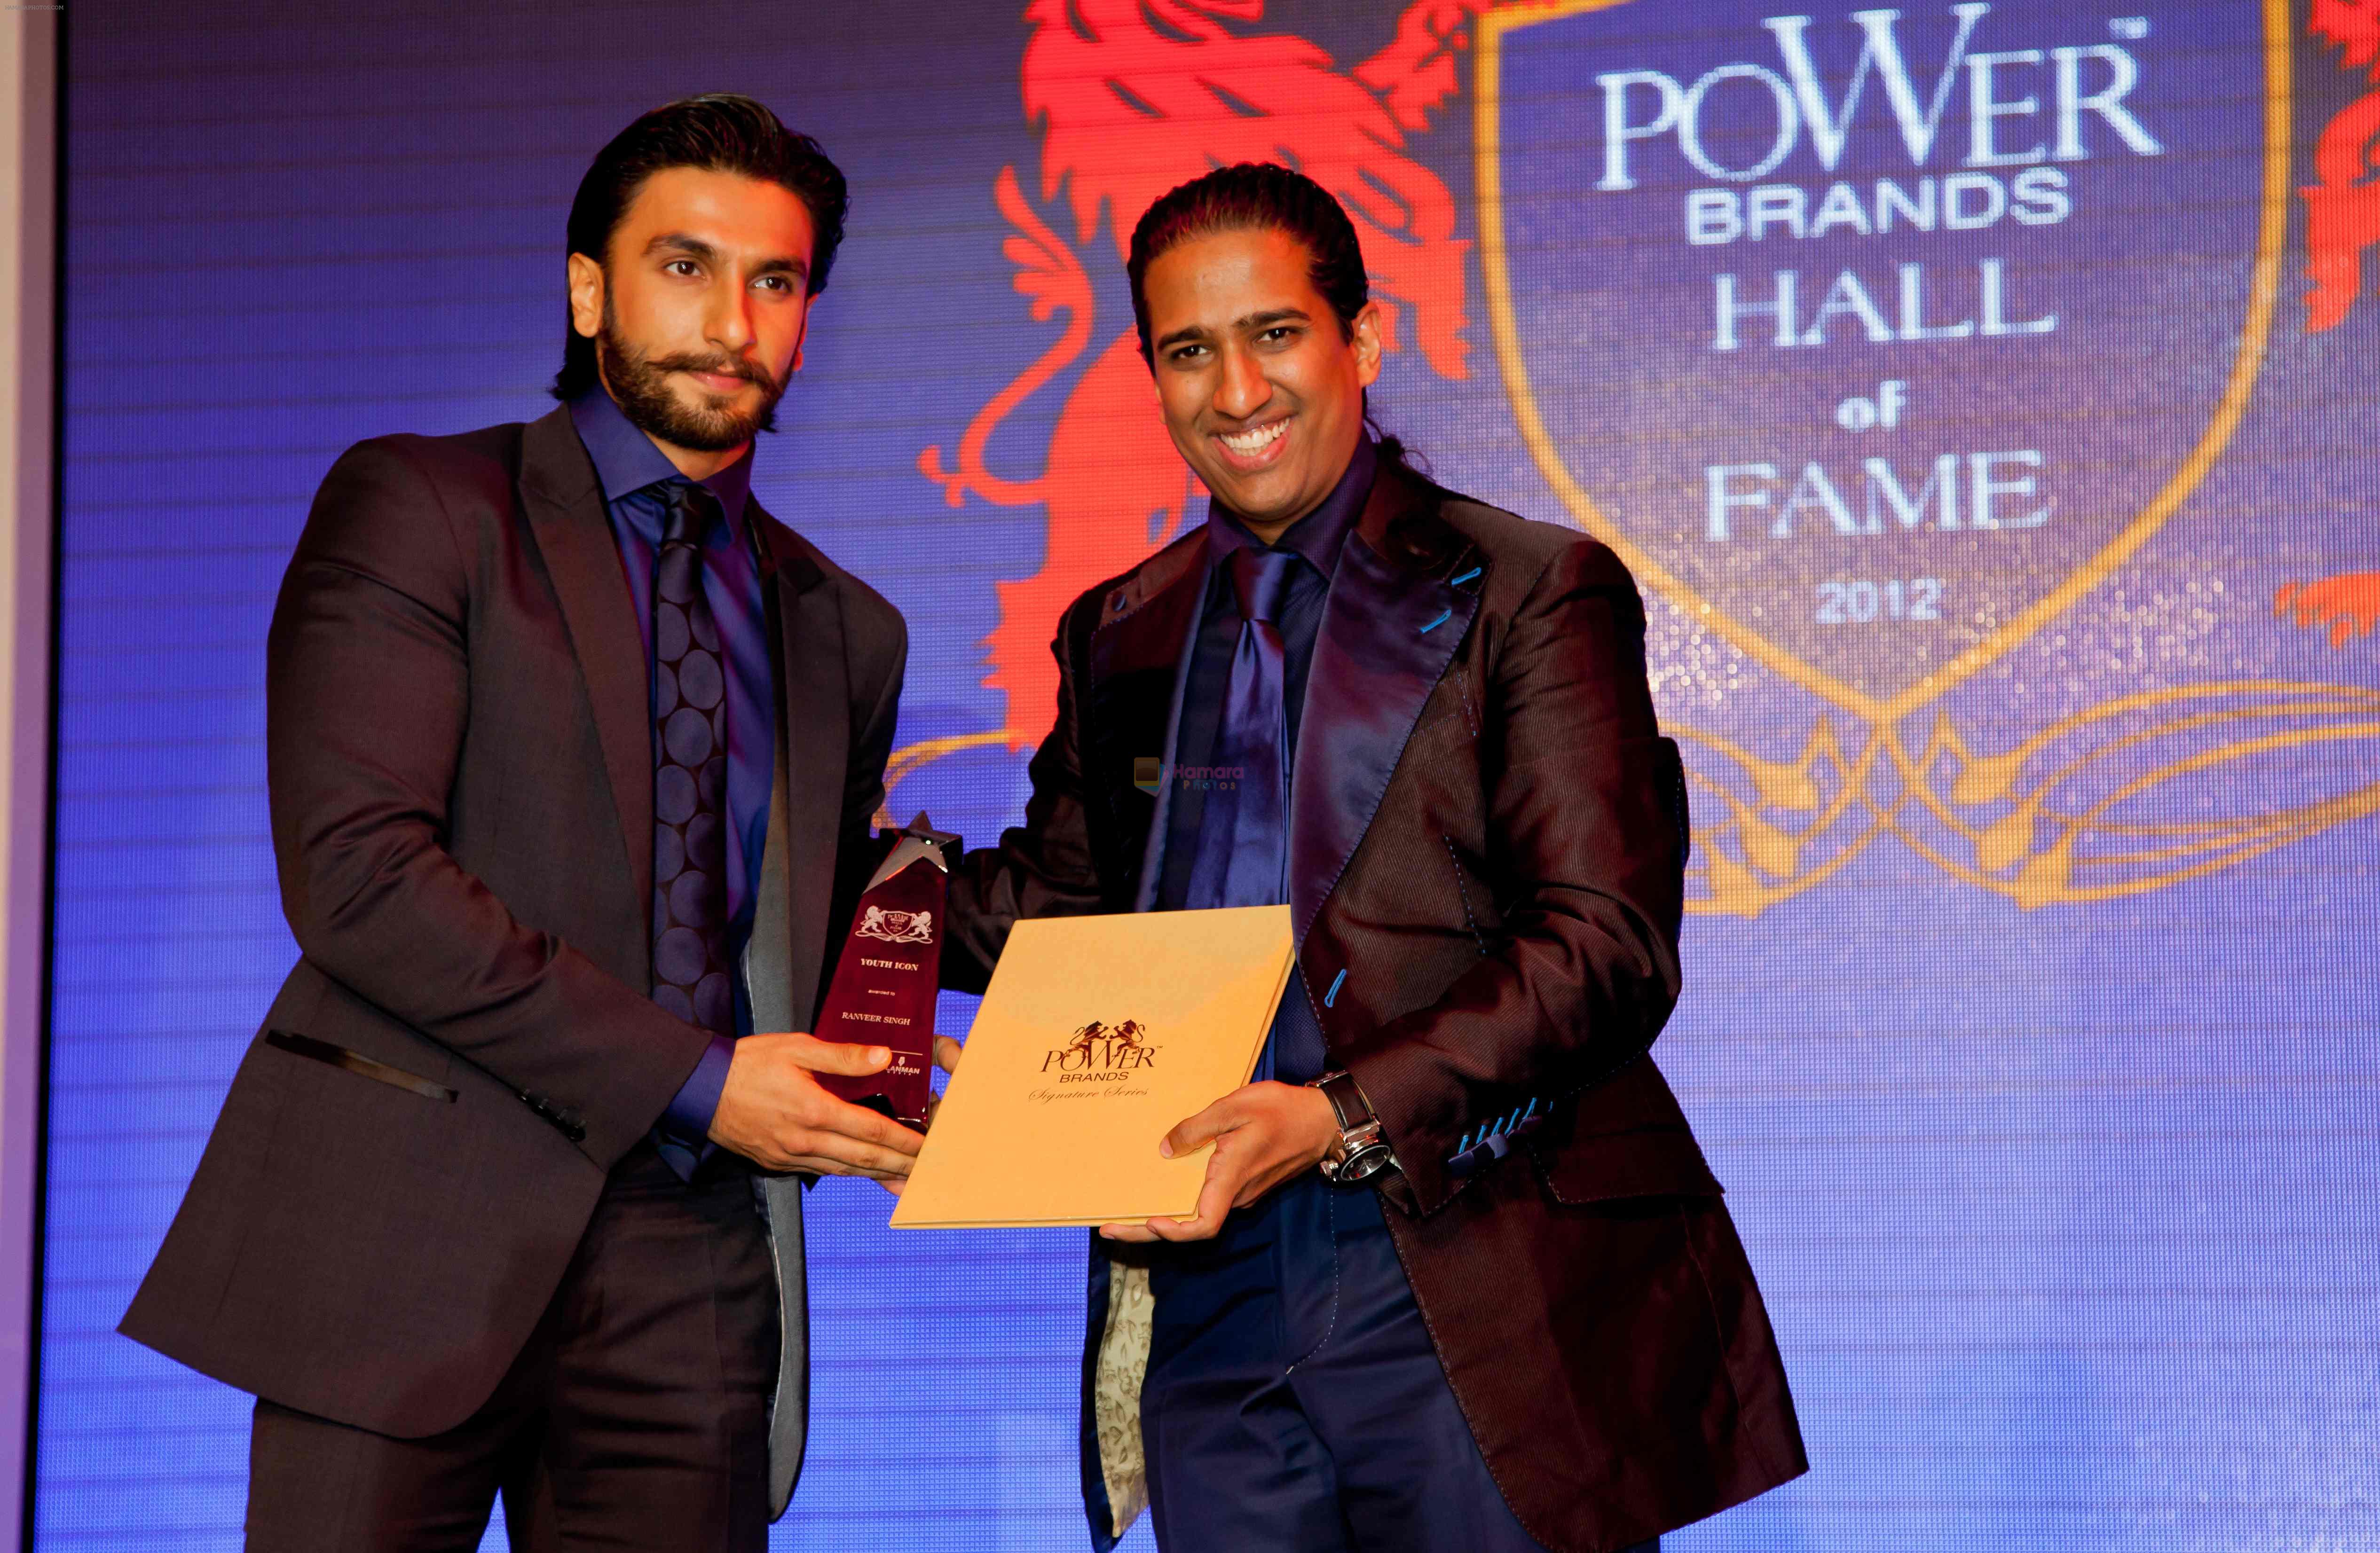 Prof. Chaudhuri awarding Ranveer Singh at the launch of PowerBrands Rising Stars 2012-13 in Dubai on 29th Aug 2012